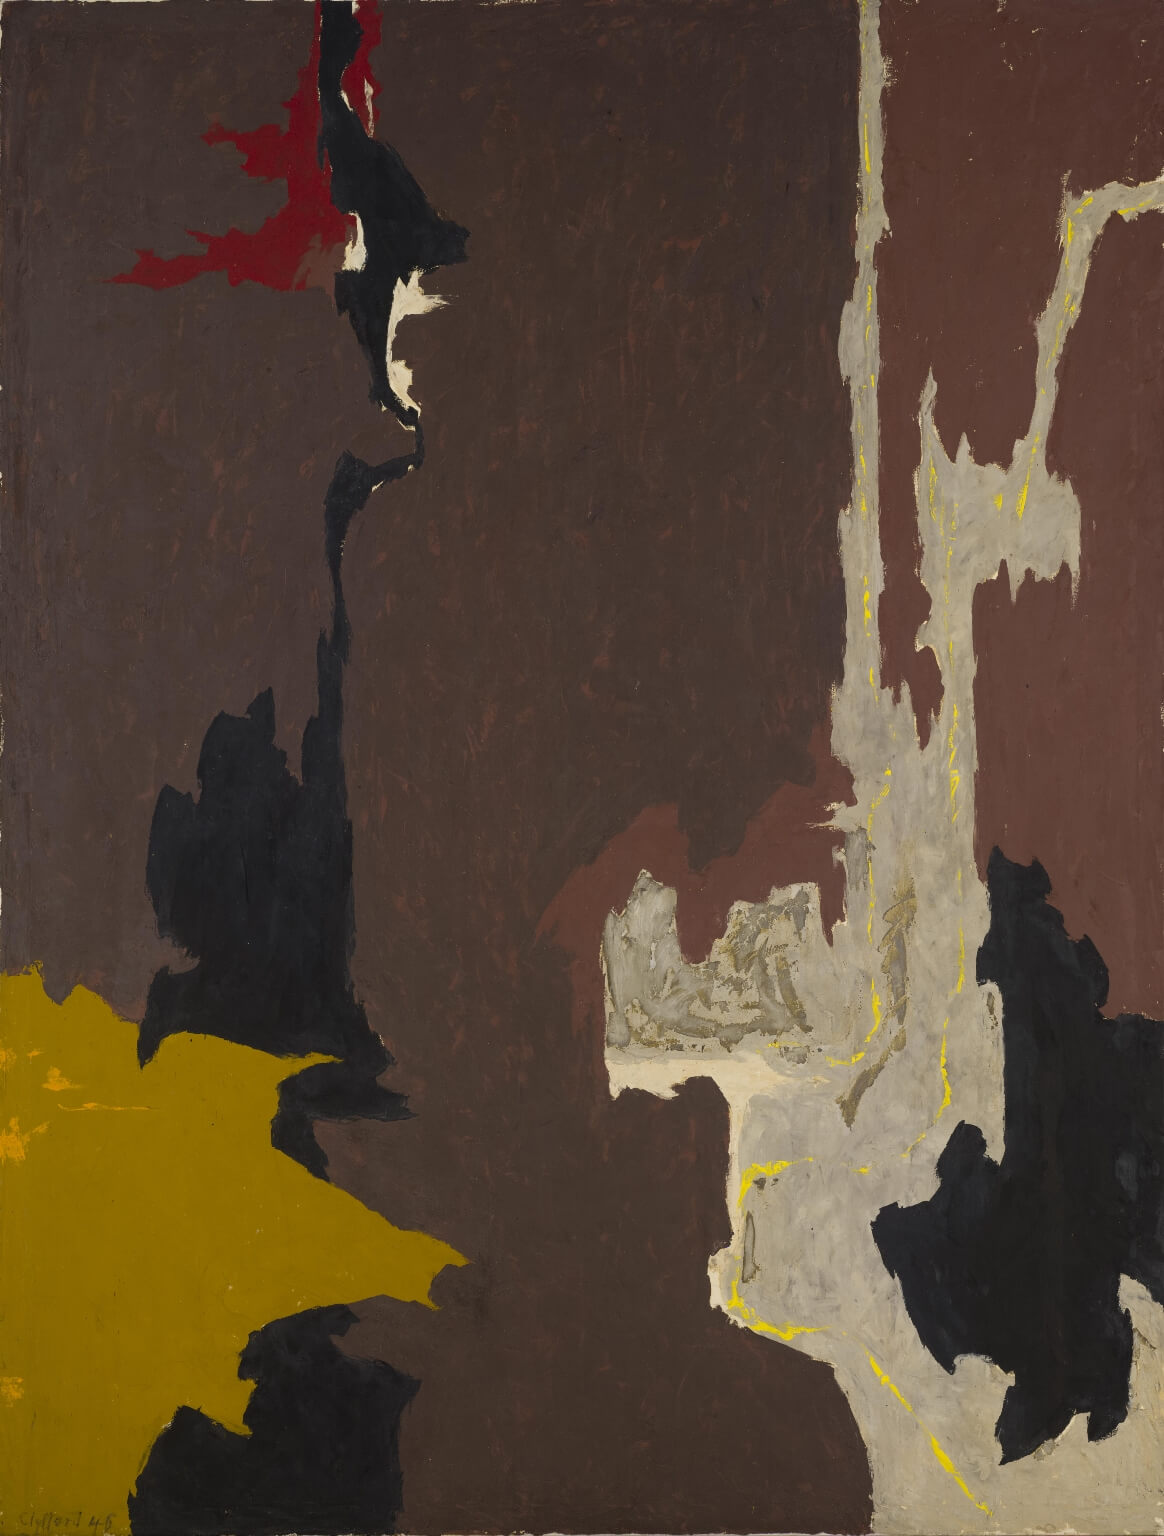 Abstract oil painting with mostly brown and sections of gray, black, gold, and hints of white and red